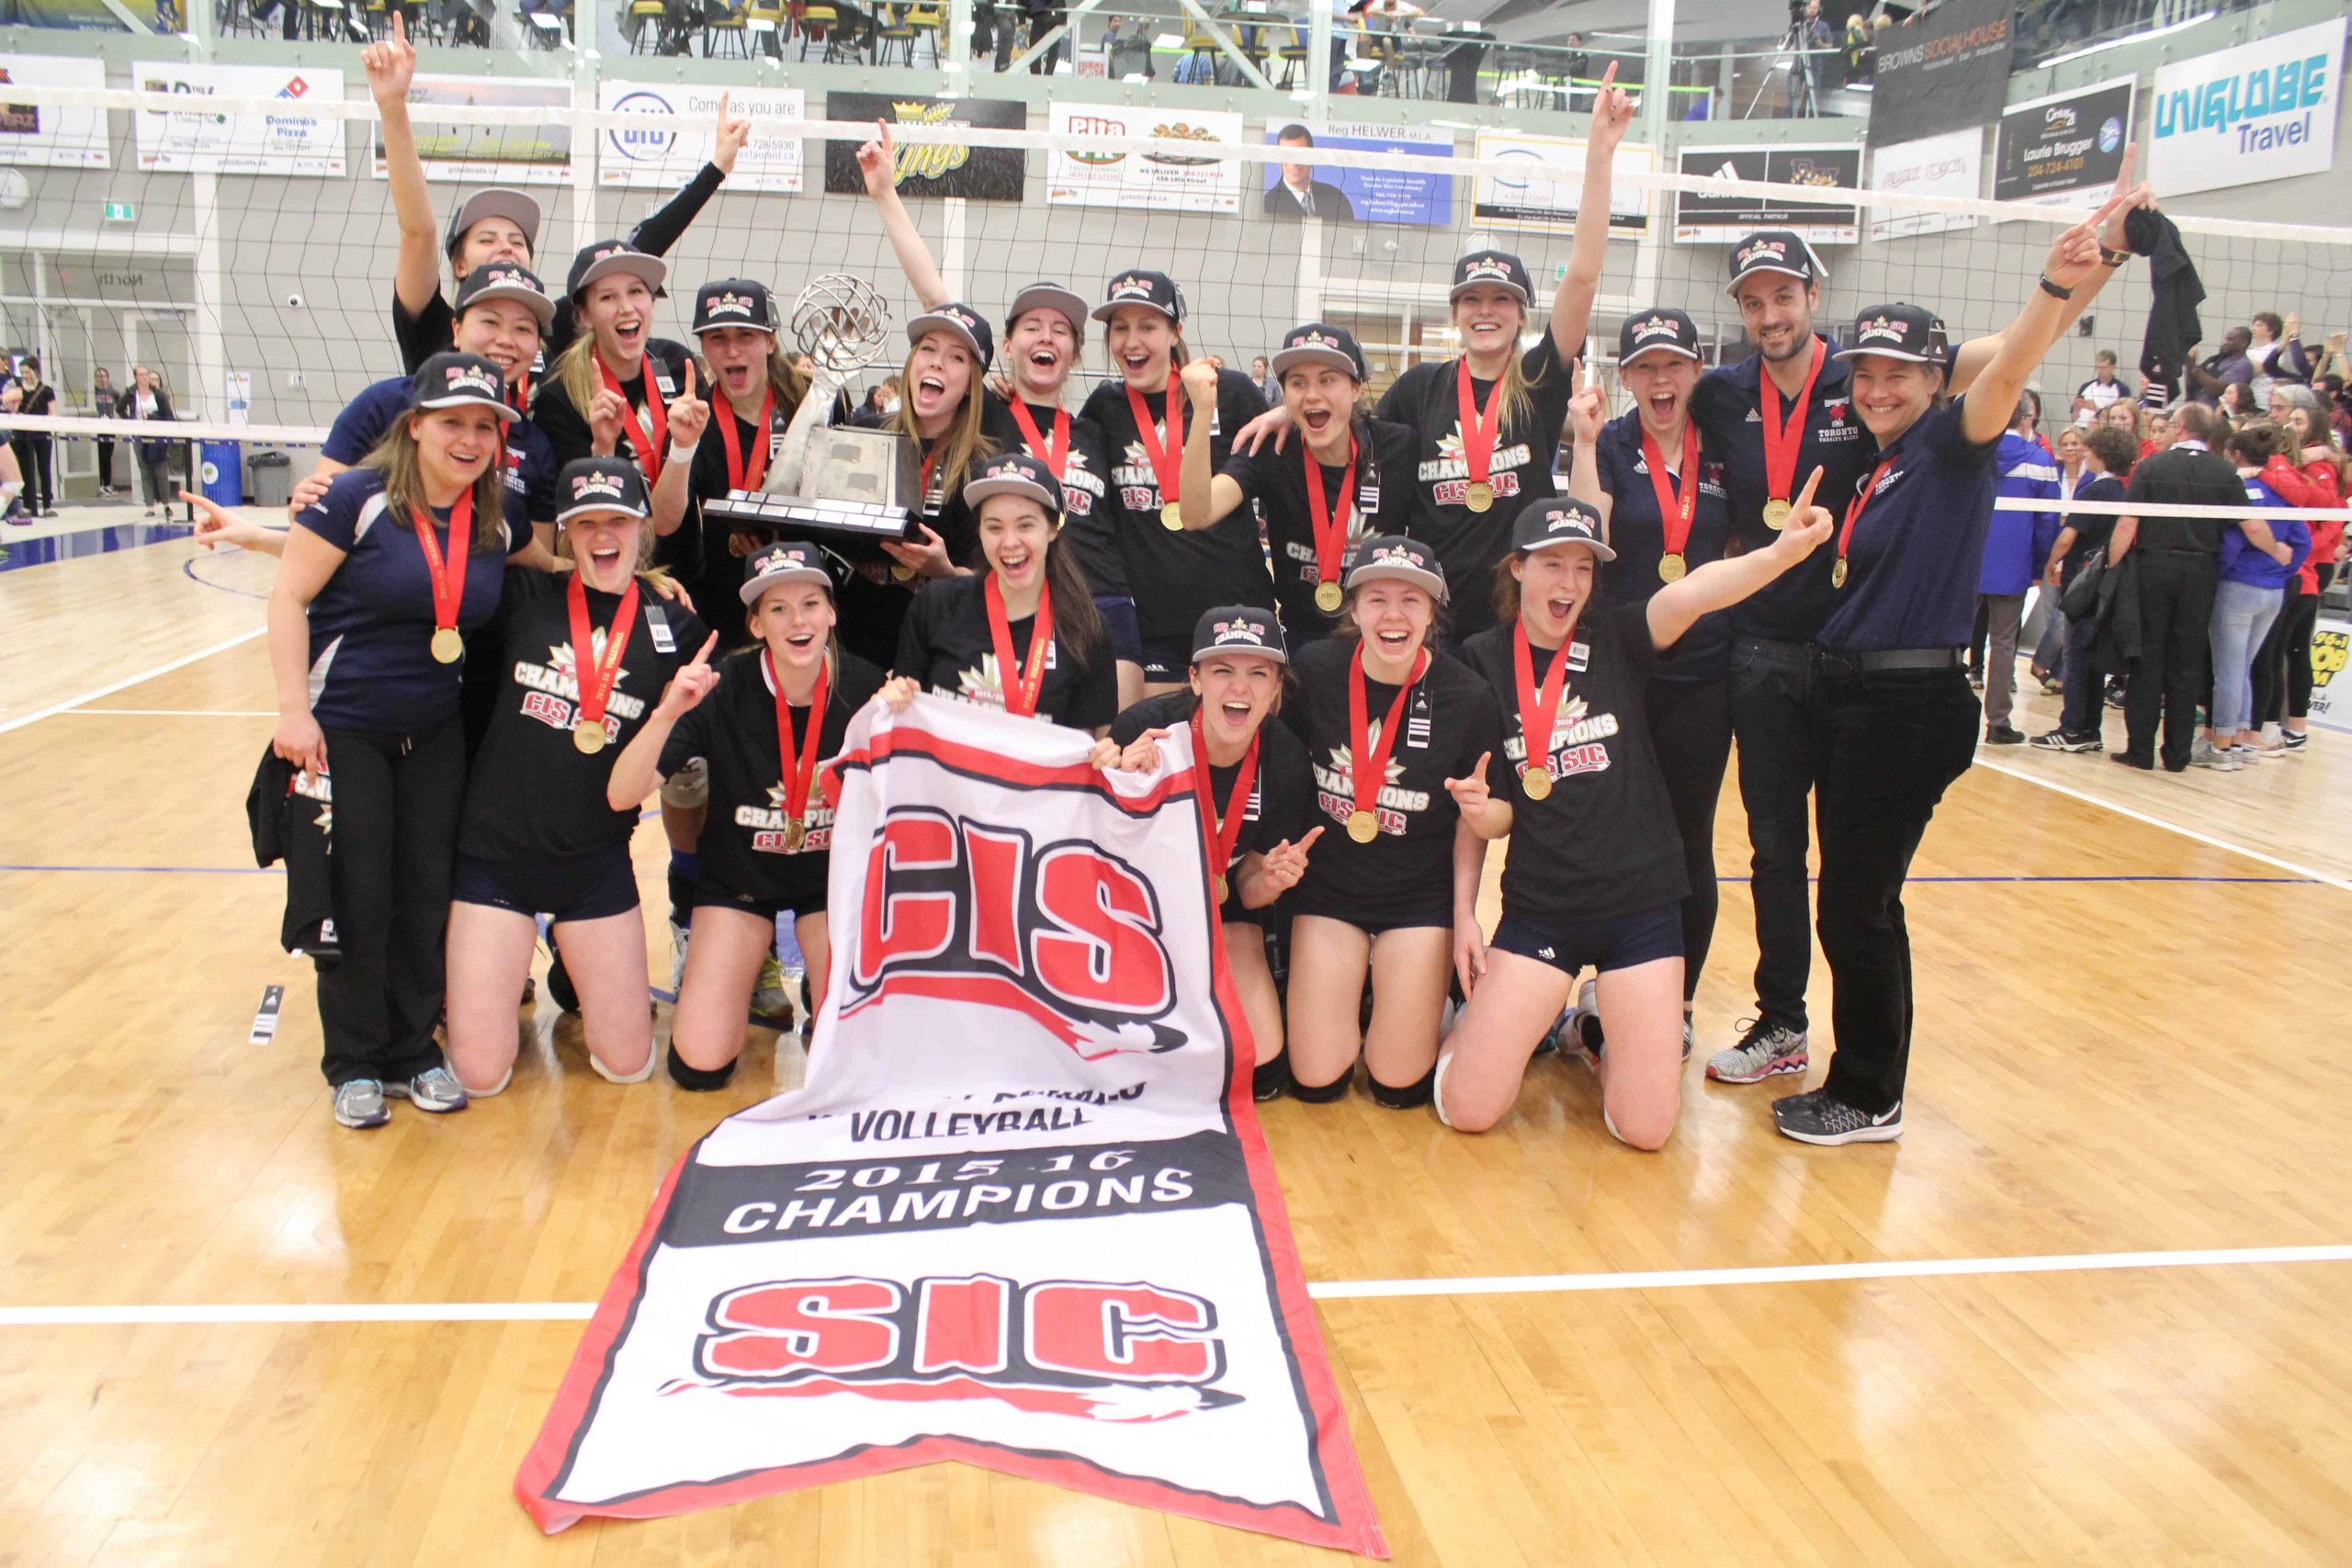 Women's Volleyball team with the CIS championship banner. MACKENZIE GERRY/CC THE UNIVERSITY OF TORONTO